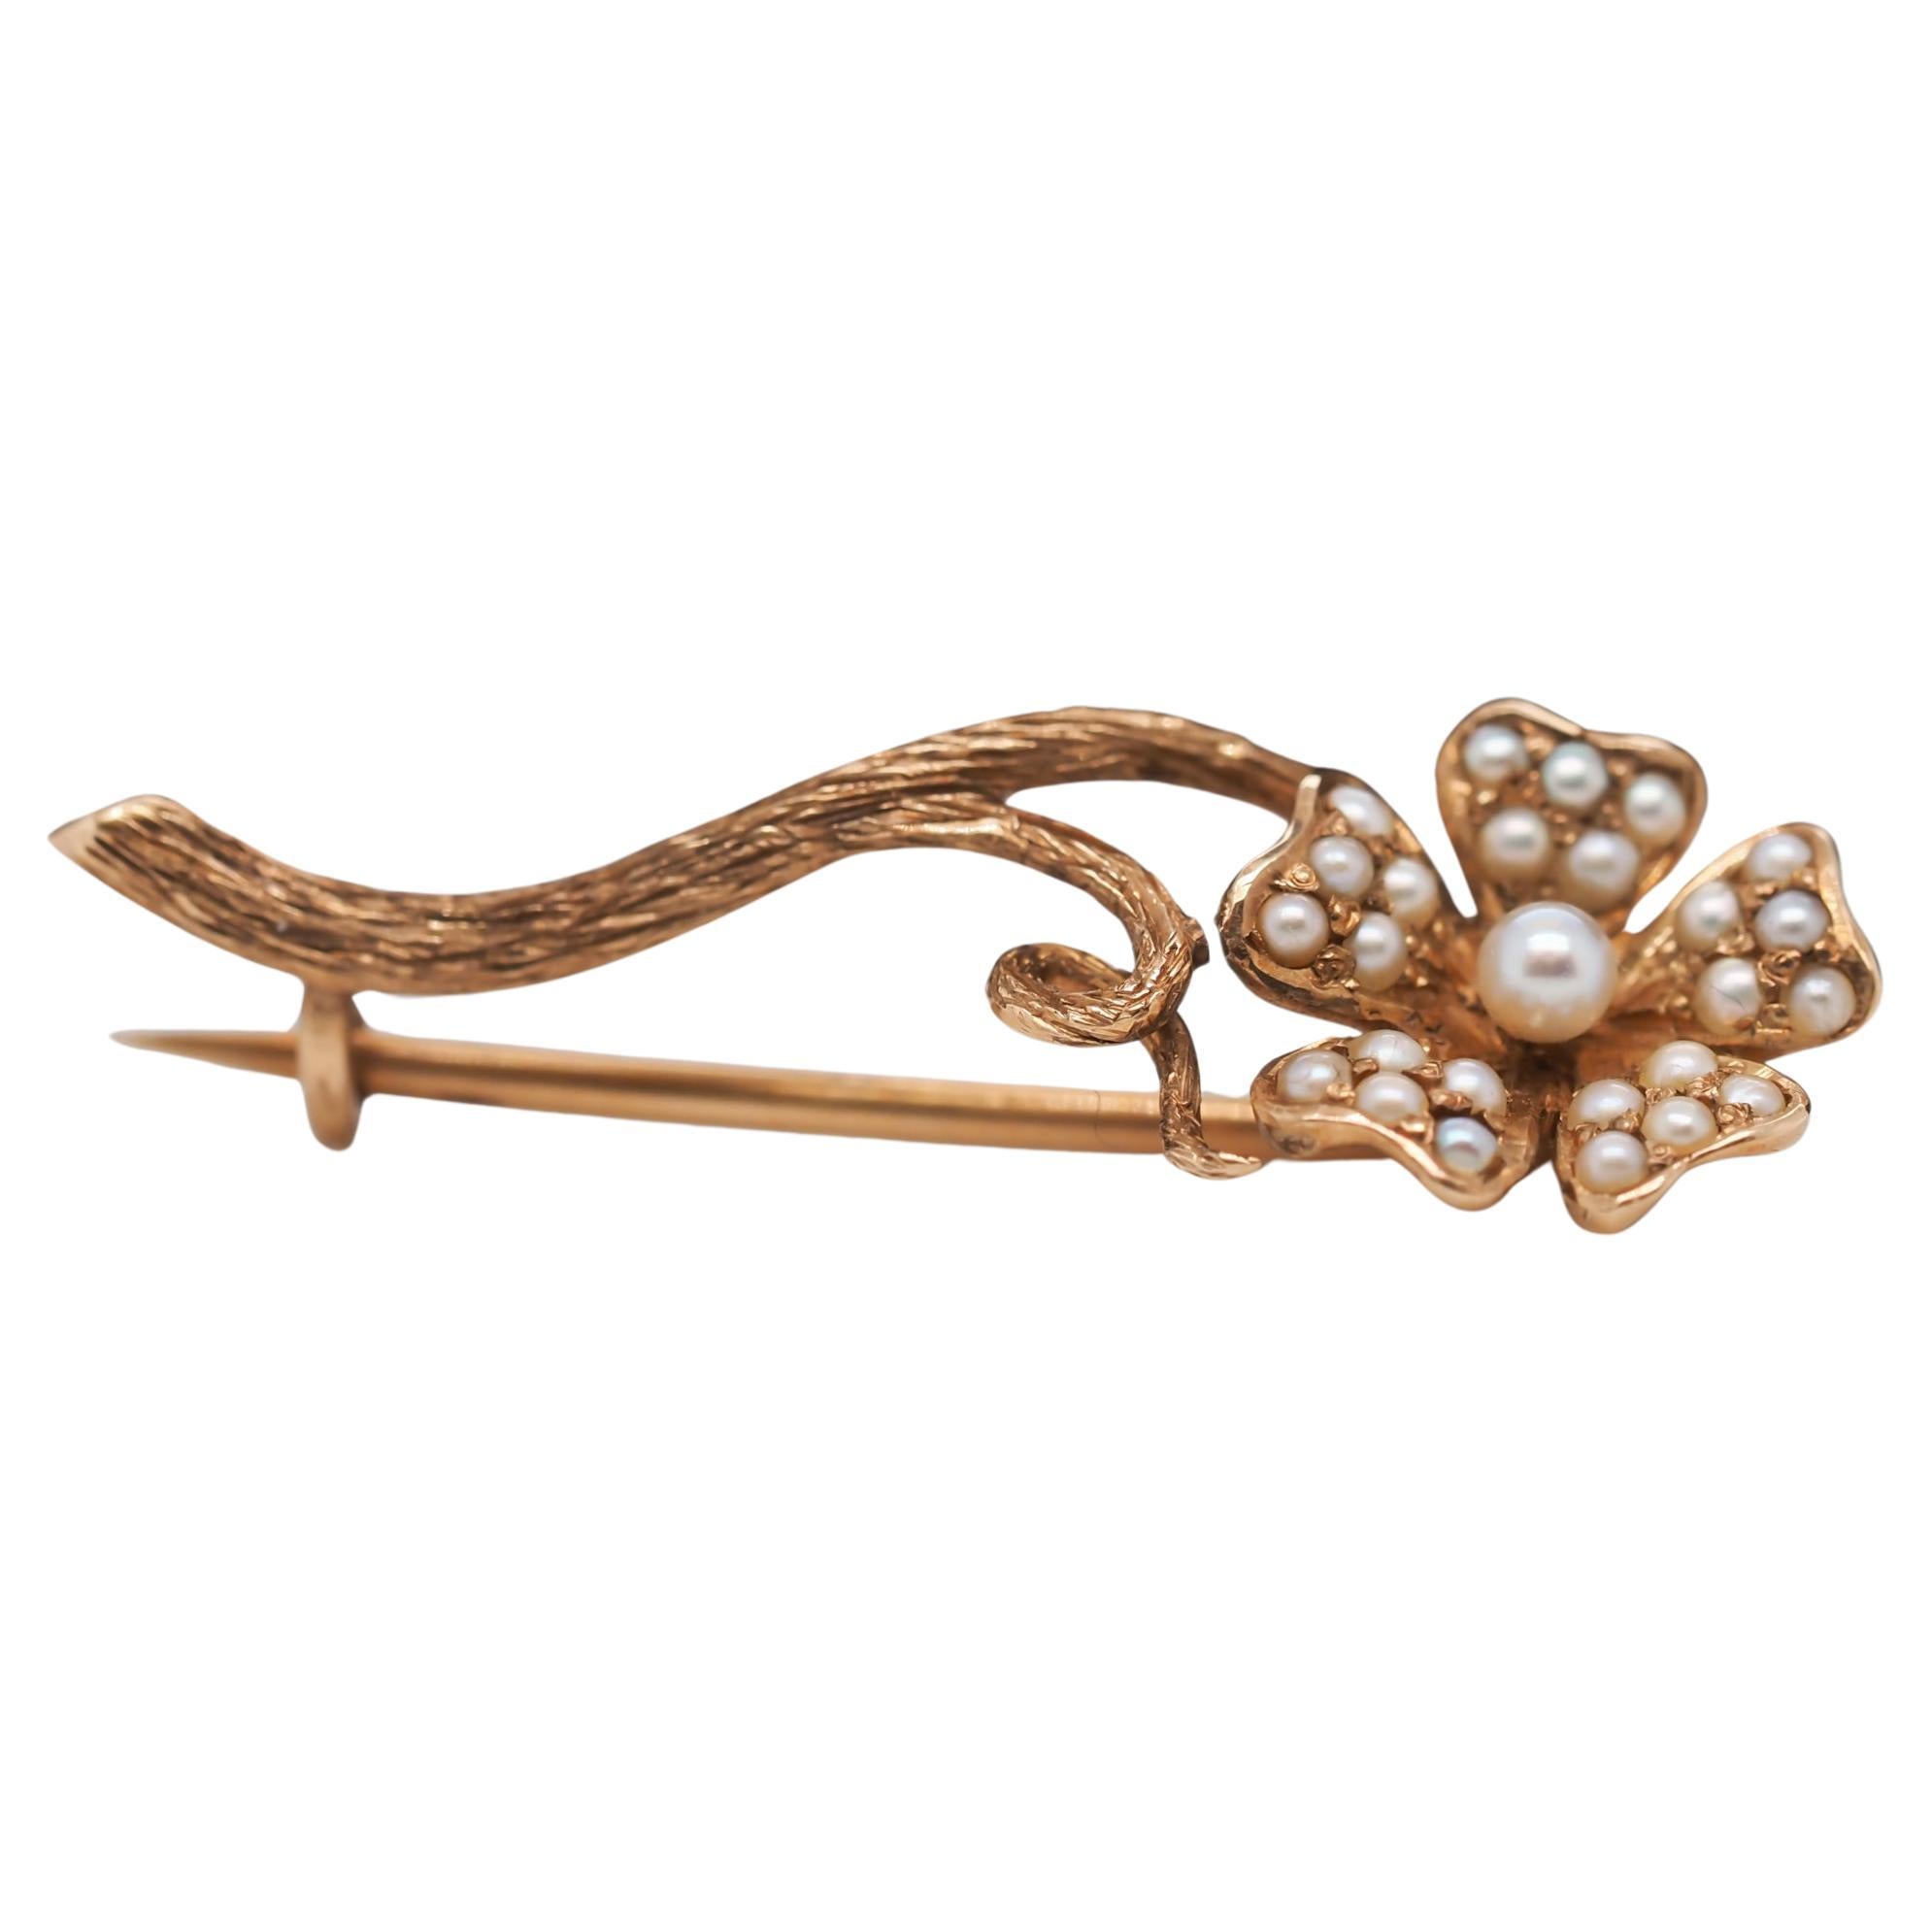 14 Karat Yellow Gold Victorian Flower Pin and Brooch with Pearls For Sale